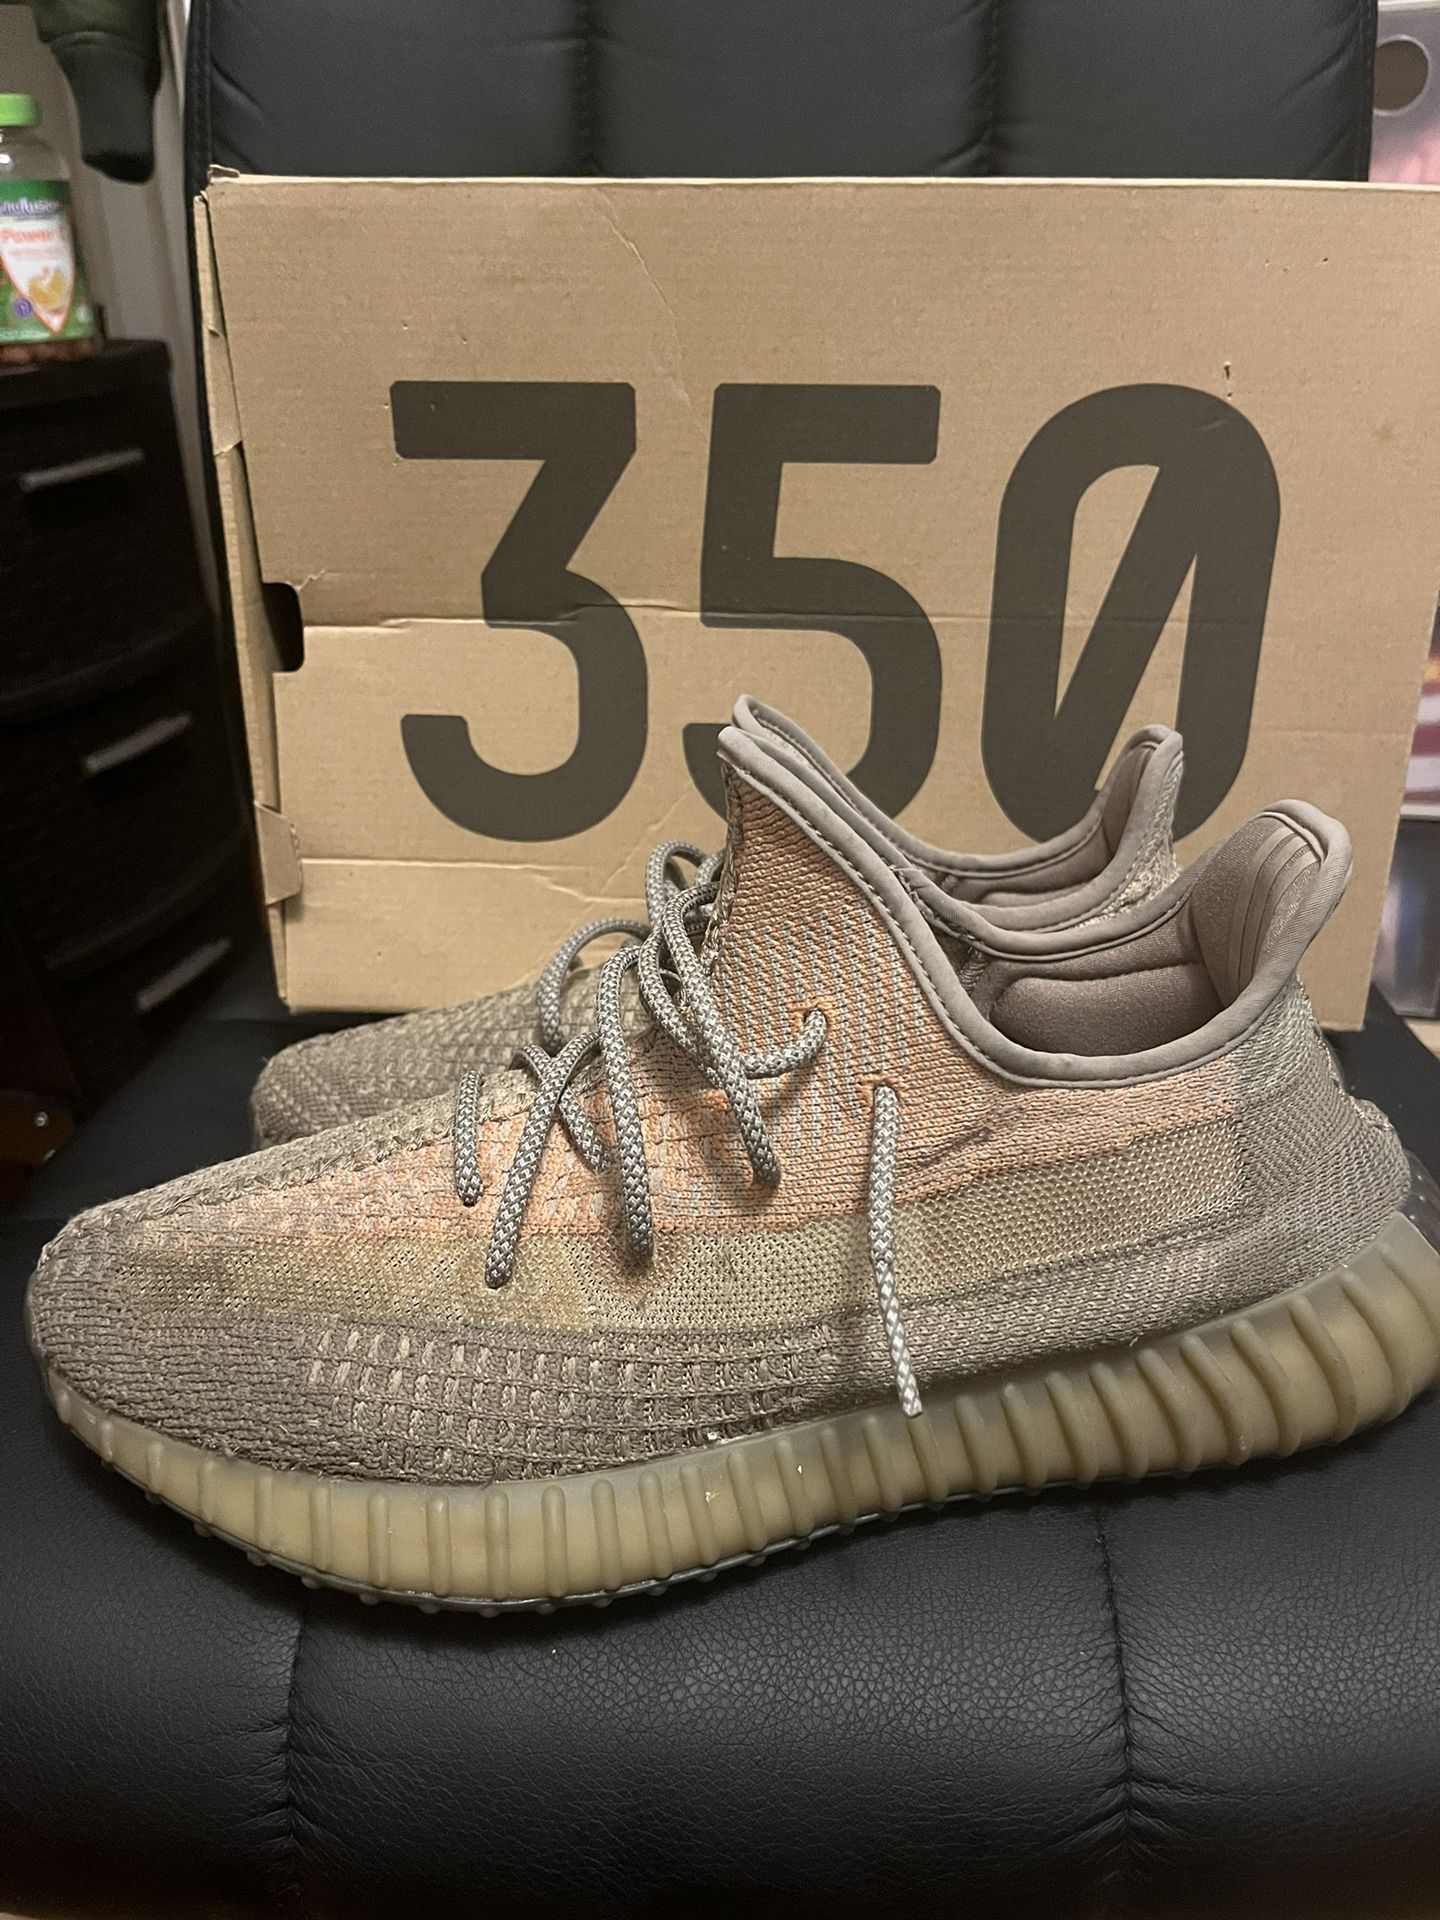 Where to Buy adidas Yeezy Boost 350 V2 Sand Taupe